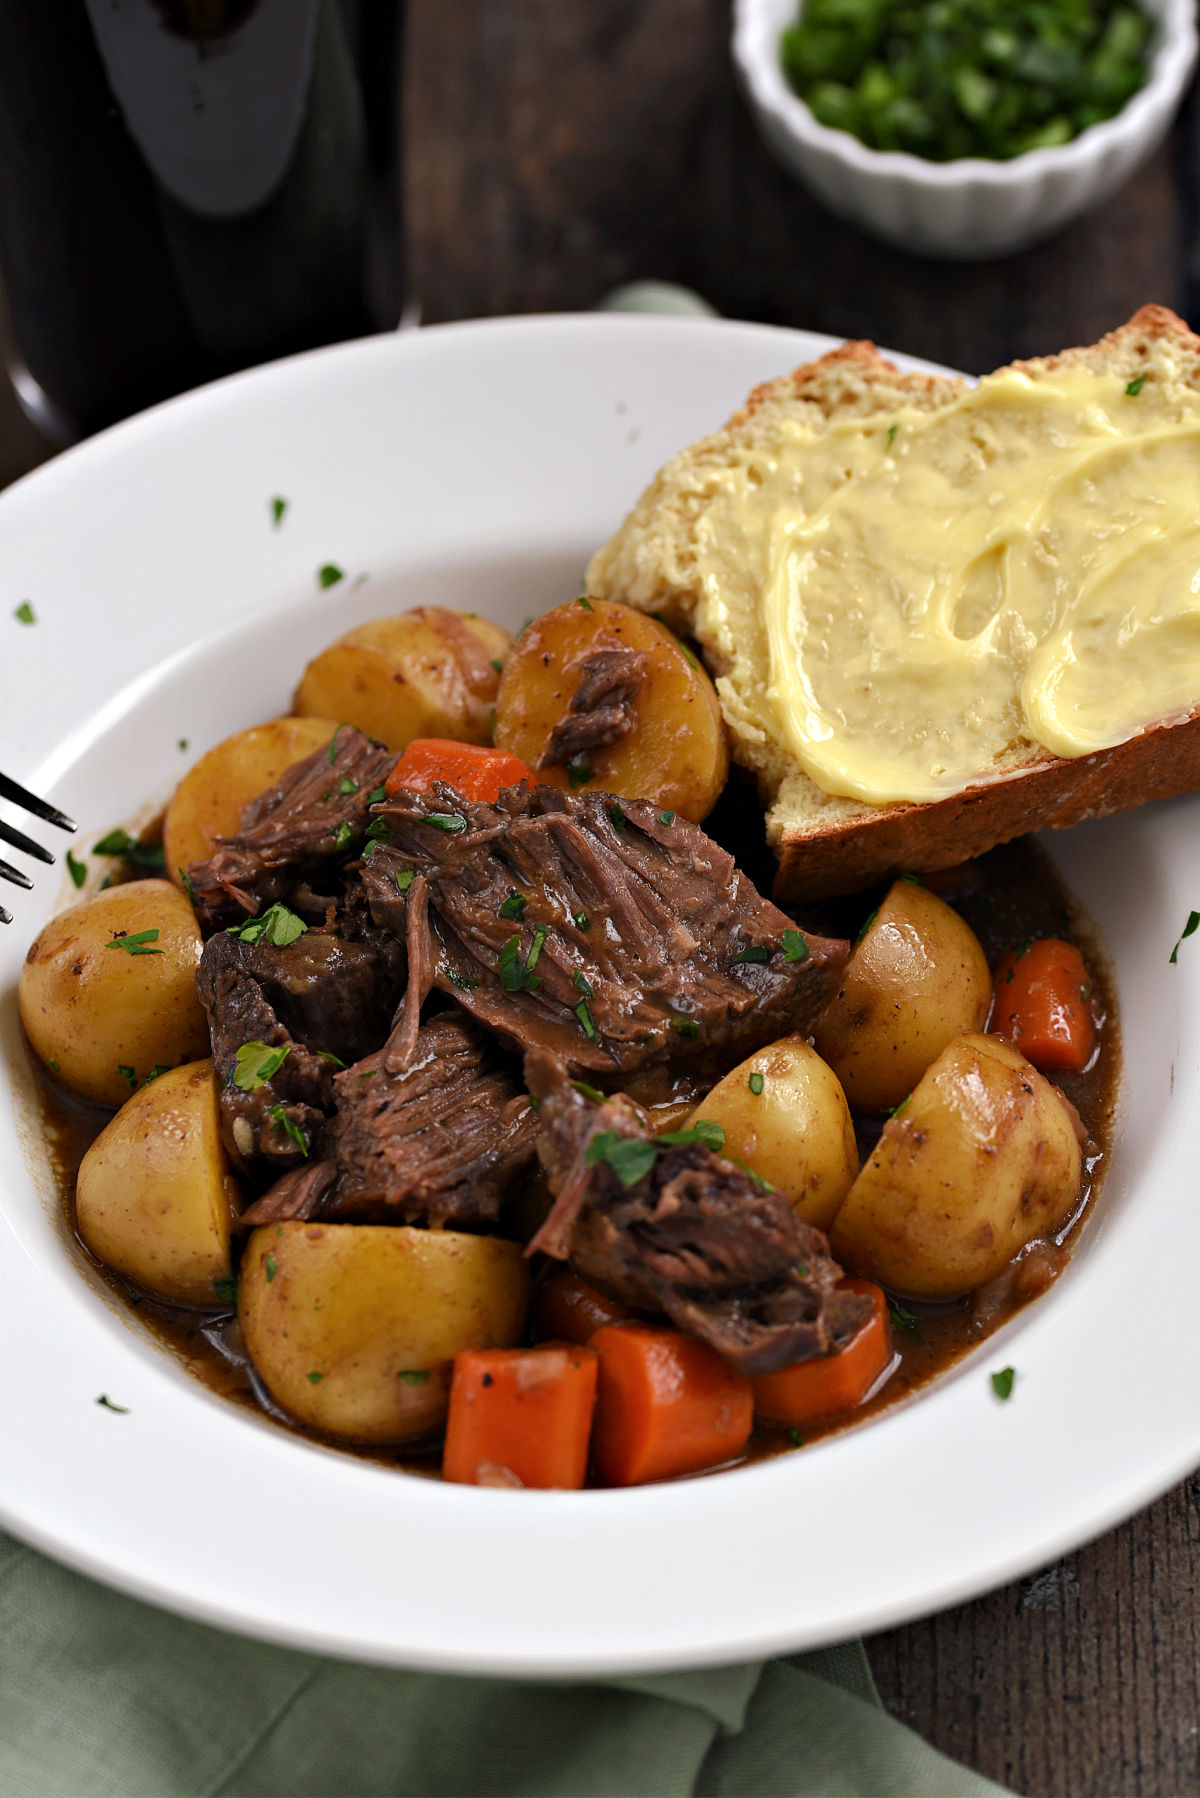 Chunks of beef roast, potatoes, and carrot slices in a Guinness stout gravy with buttered bread on the edge of the bowl.